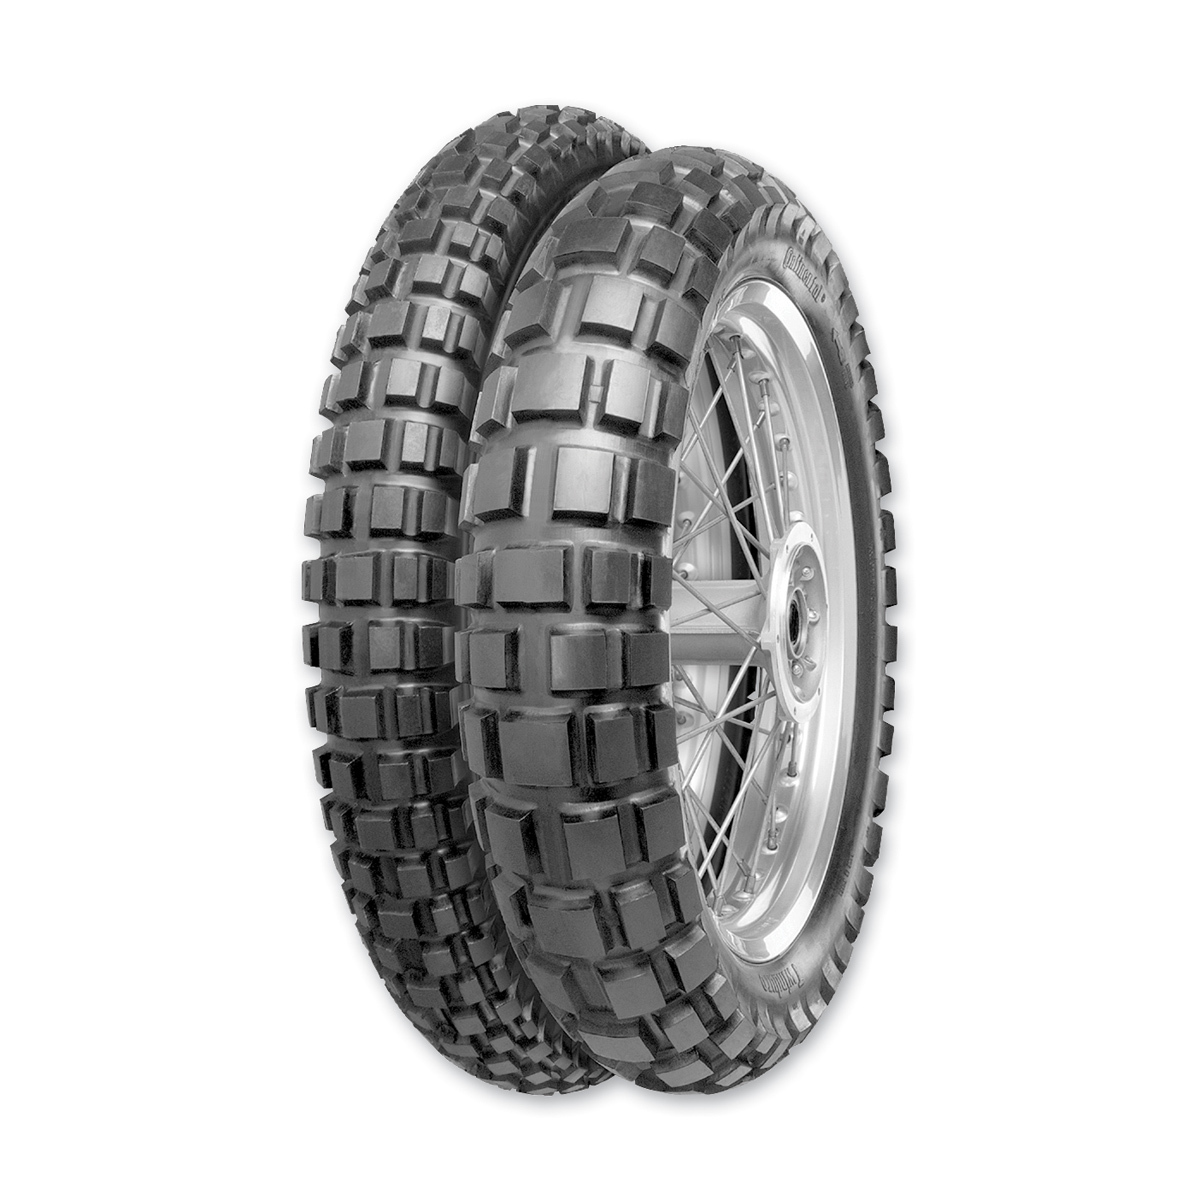 Continental TKC80 Front Tire 90/90-21 Tube Type 